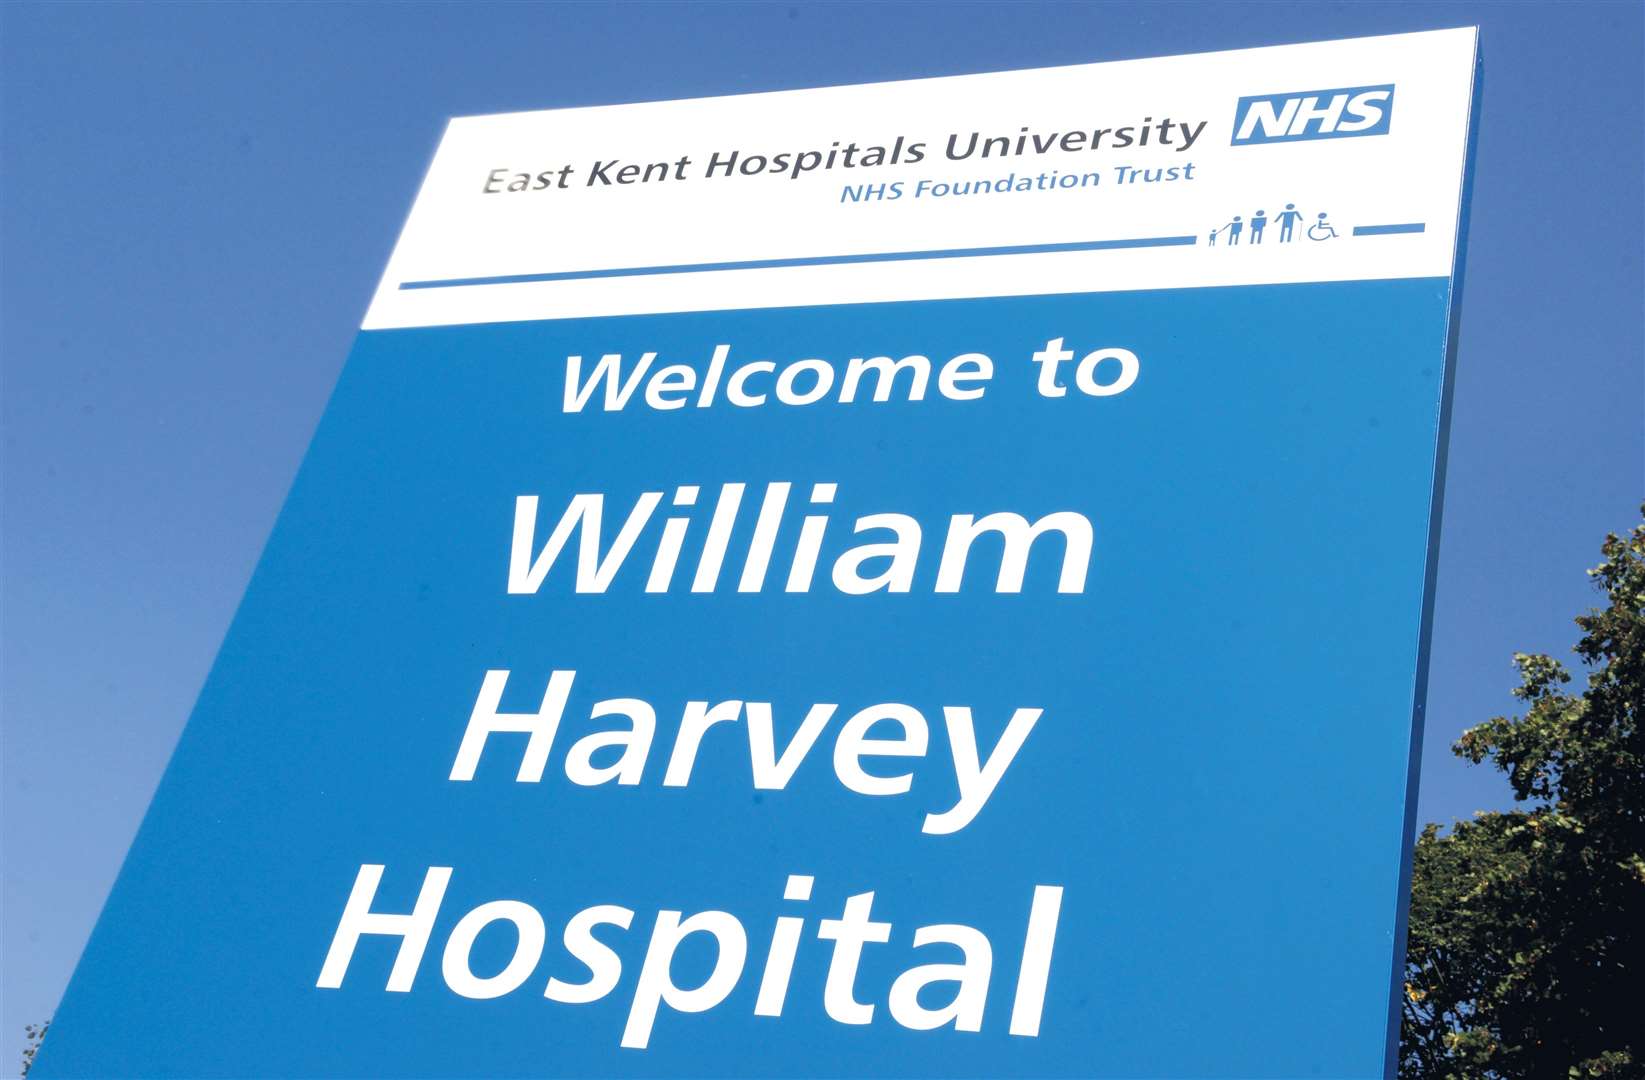 A petition has been launched to save the A&E at William Harvey Hospital in Ashford